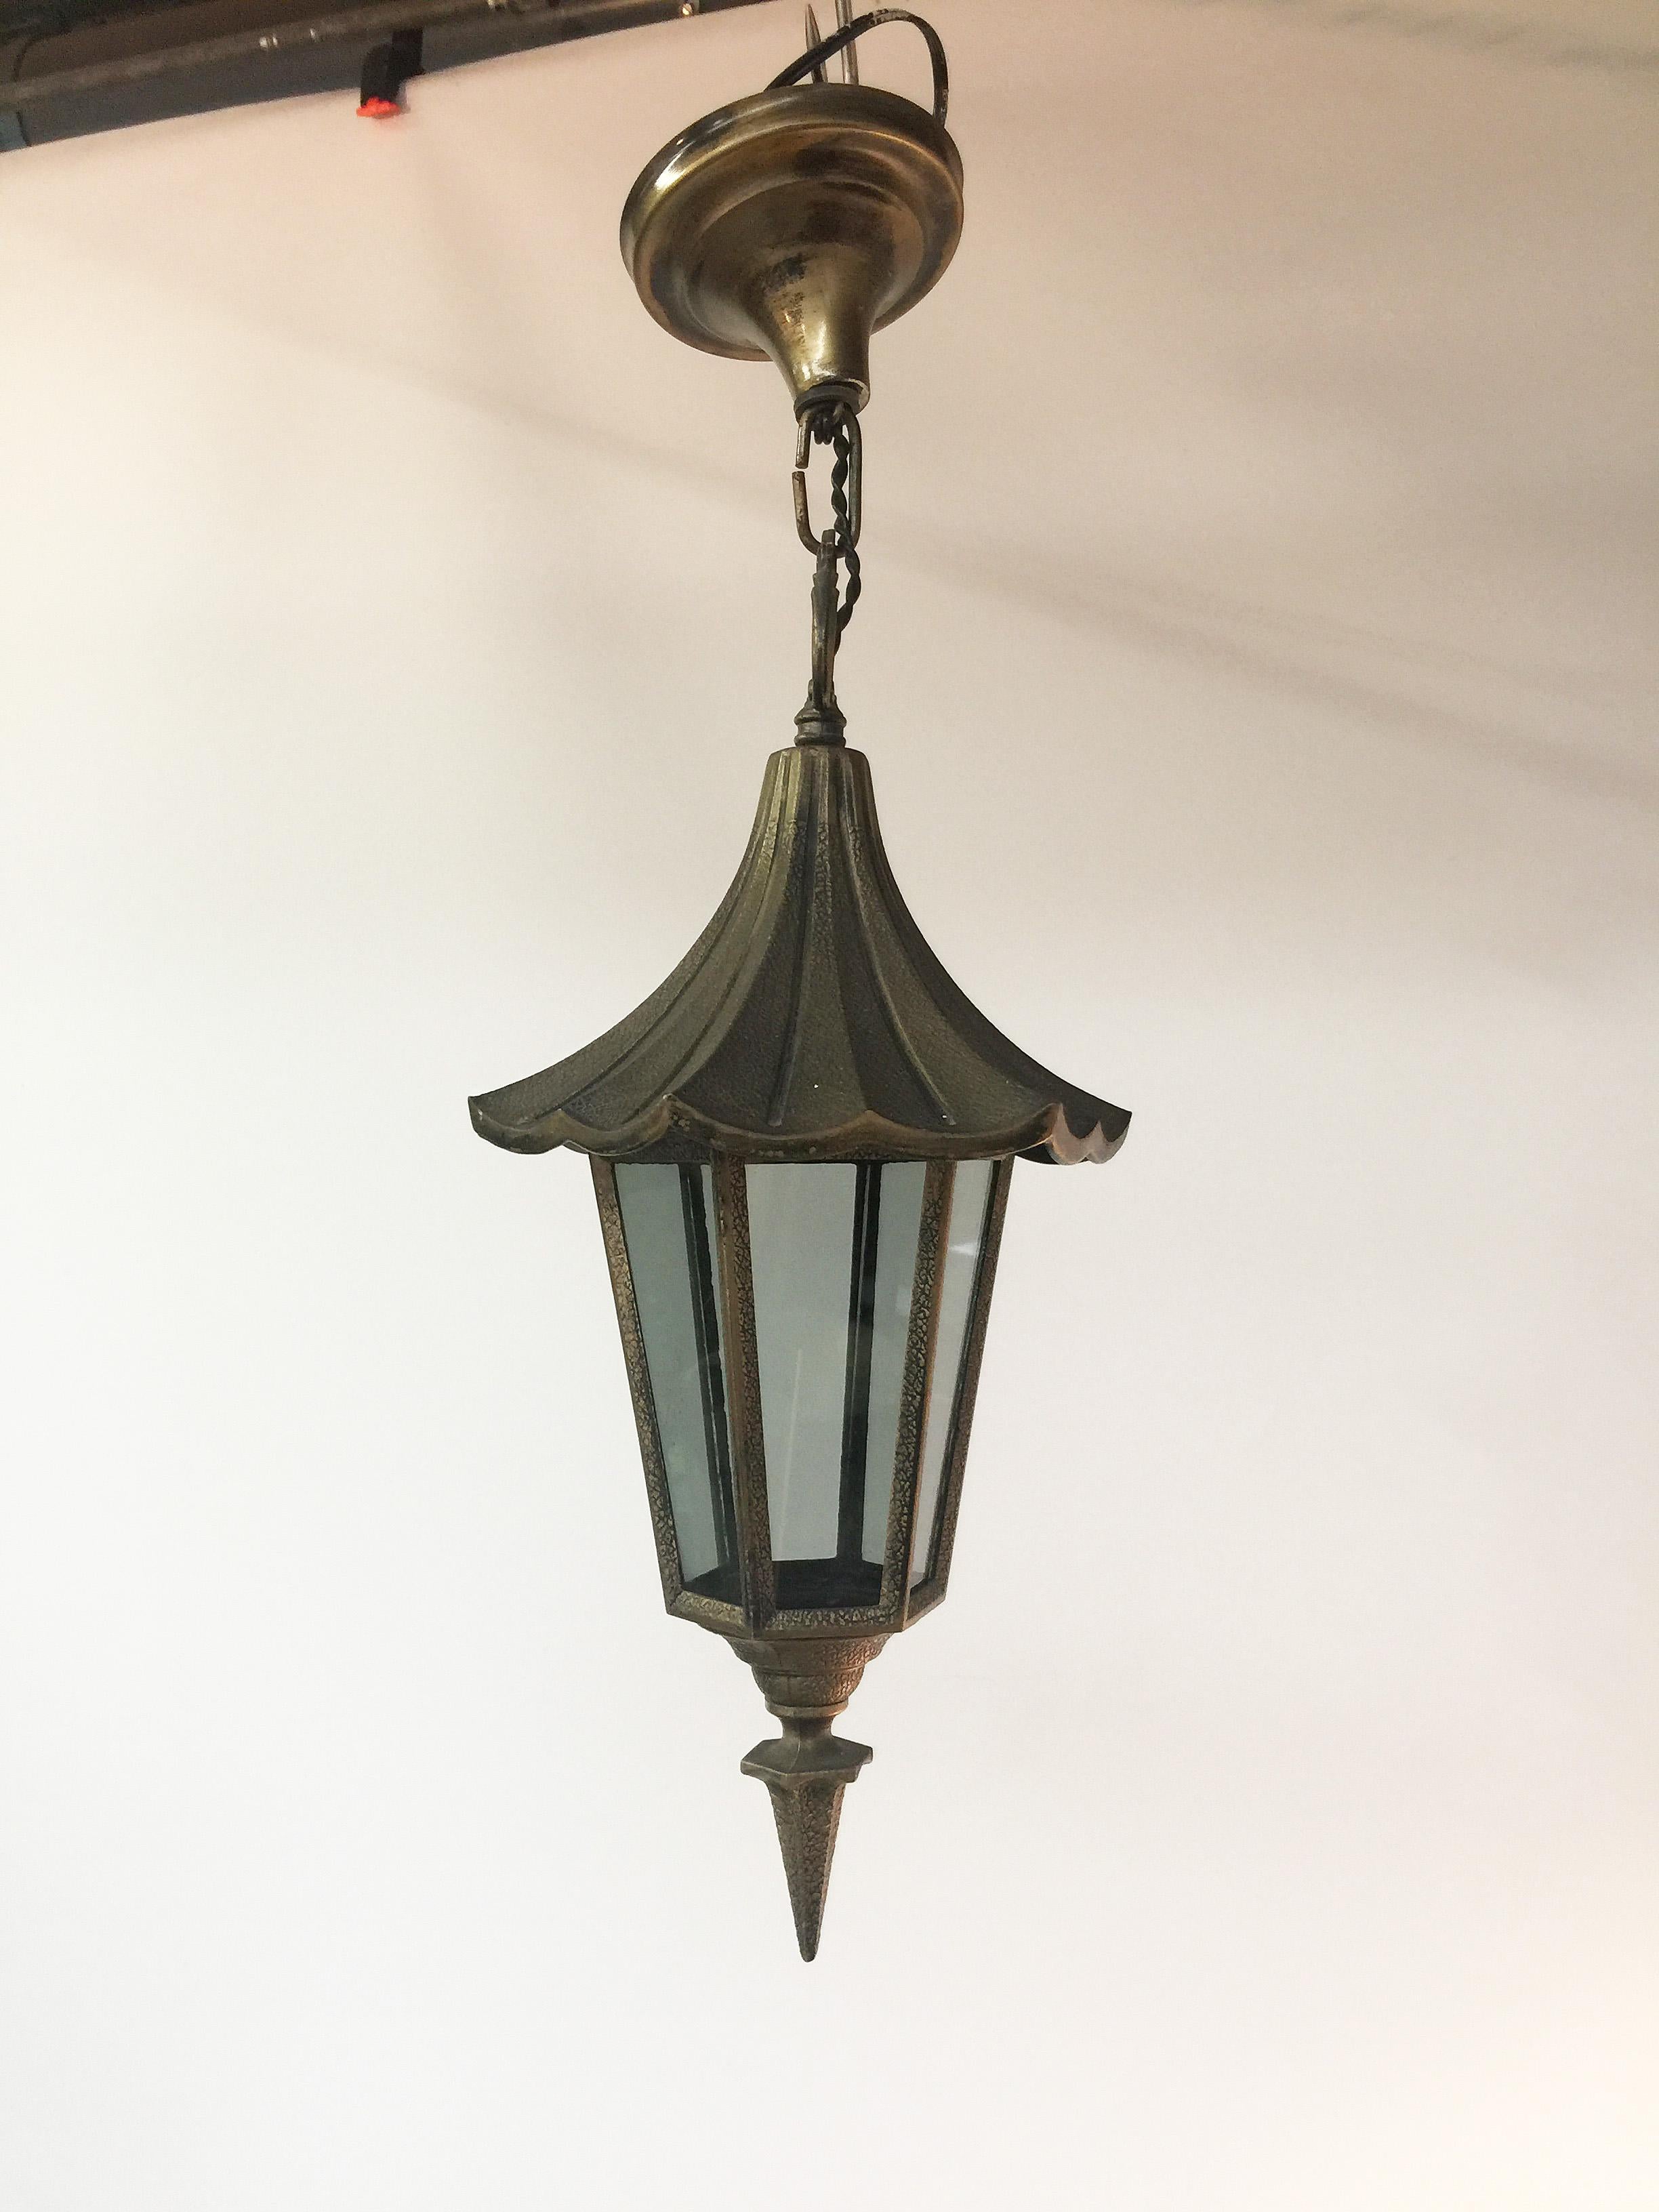 French metal pagoda style hanging lantern, circa 1950
Measures: Diameter 20 cm
Height 38 and 54 cm.